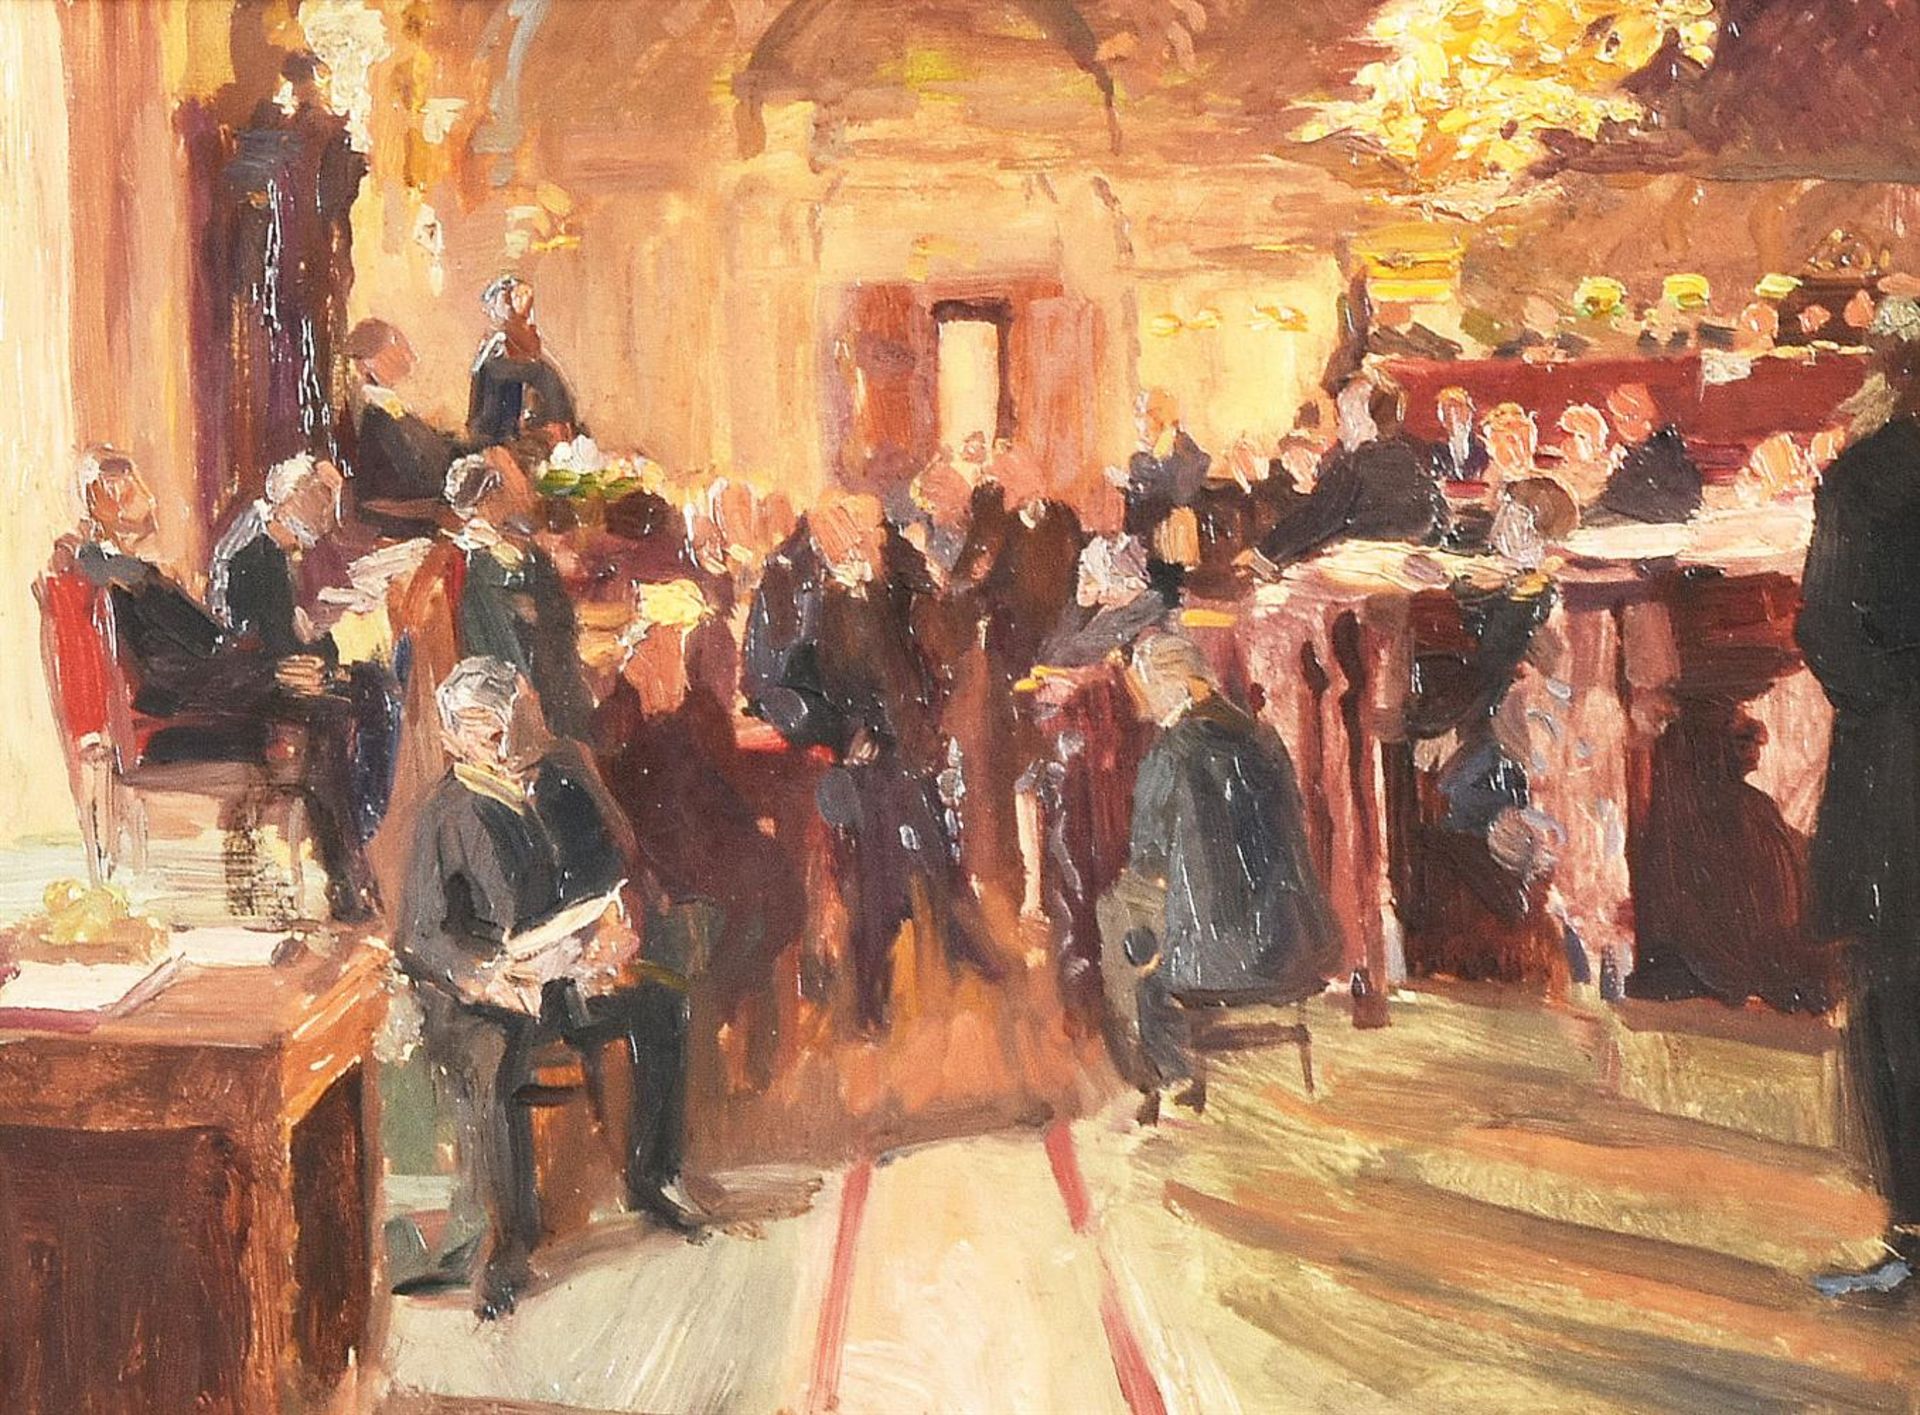 English School (early 20th century), The courtroom